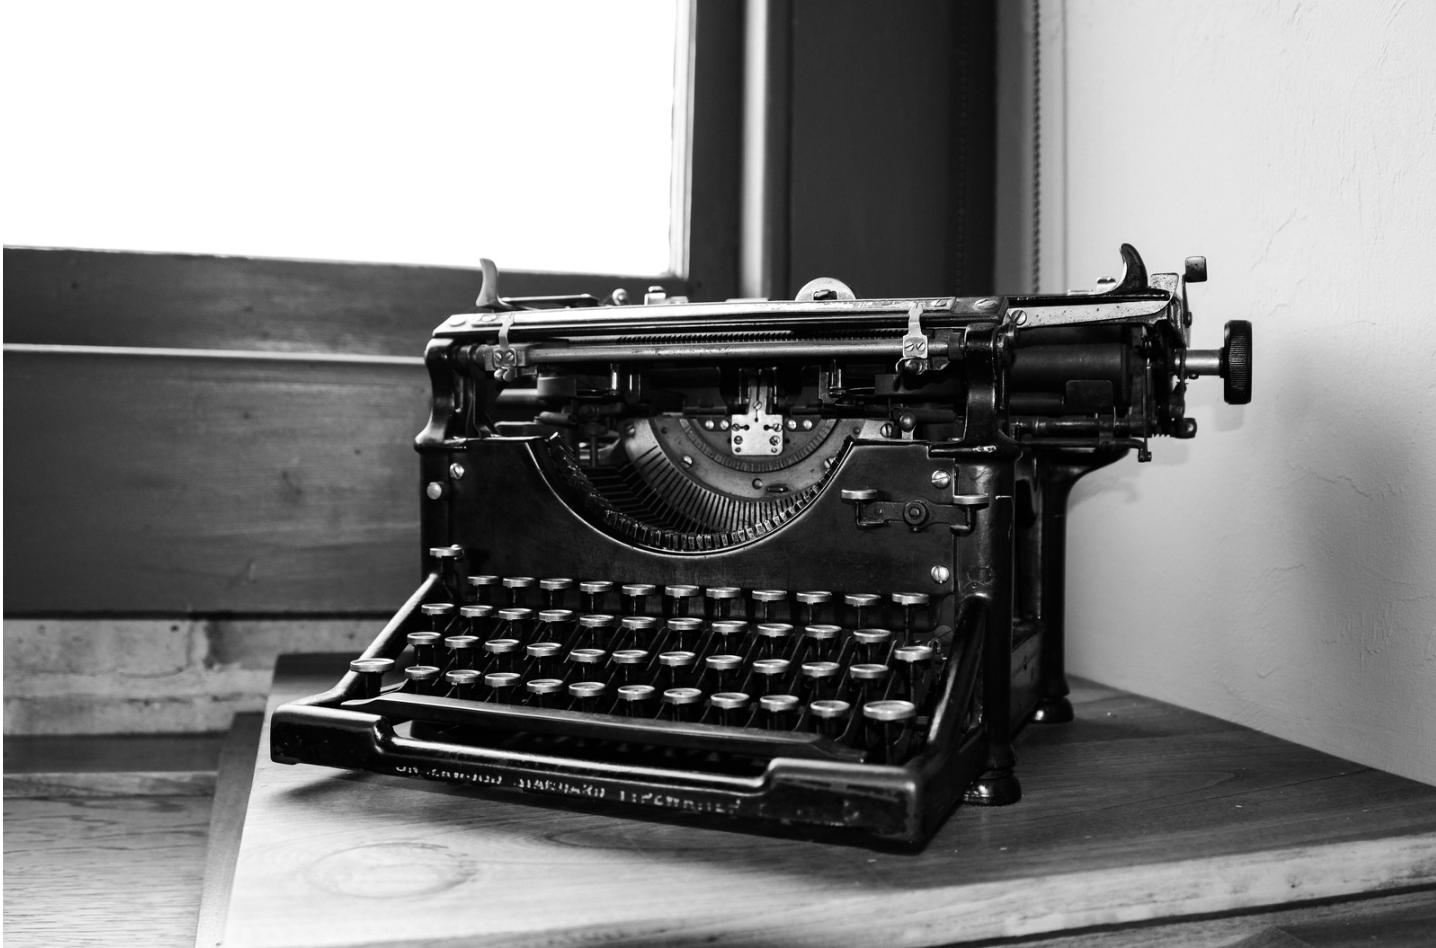 Photograph of a typewriter on a desk